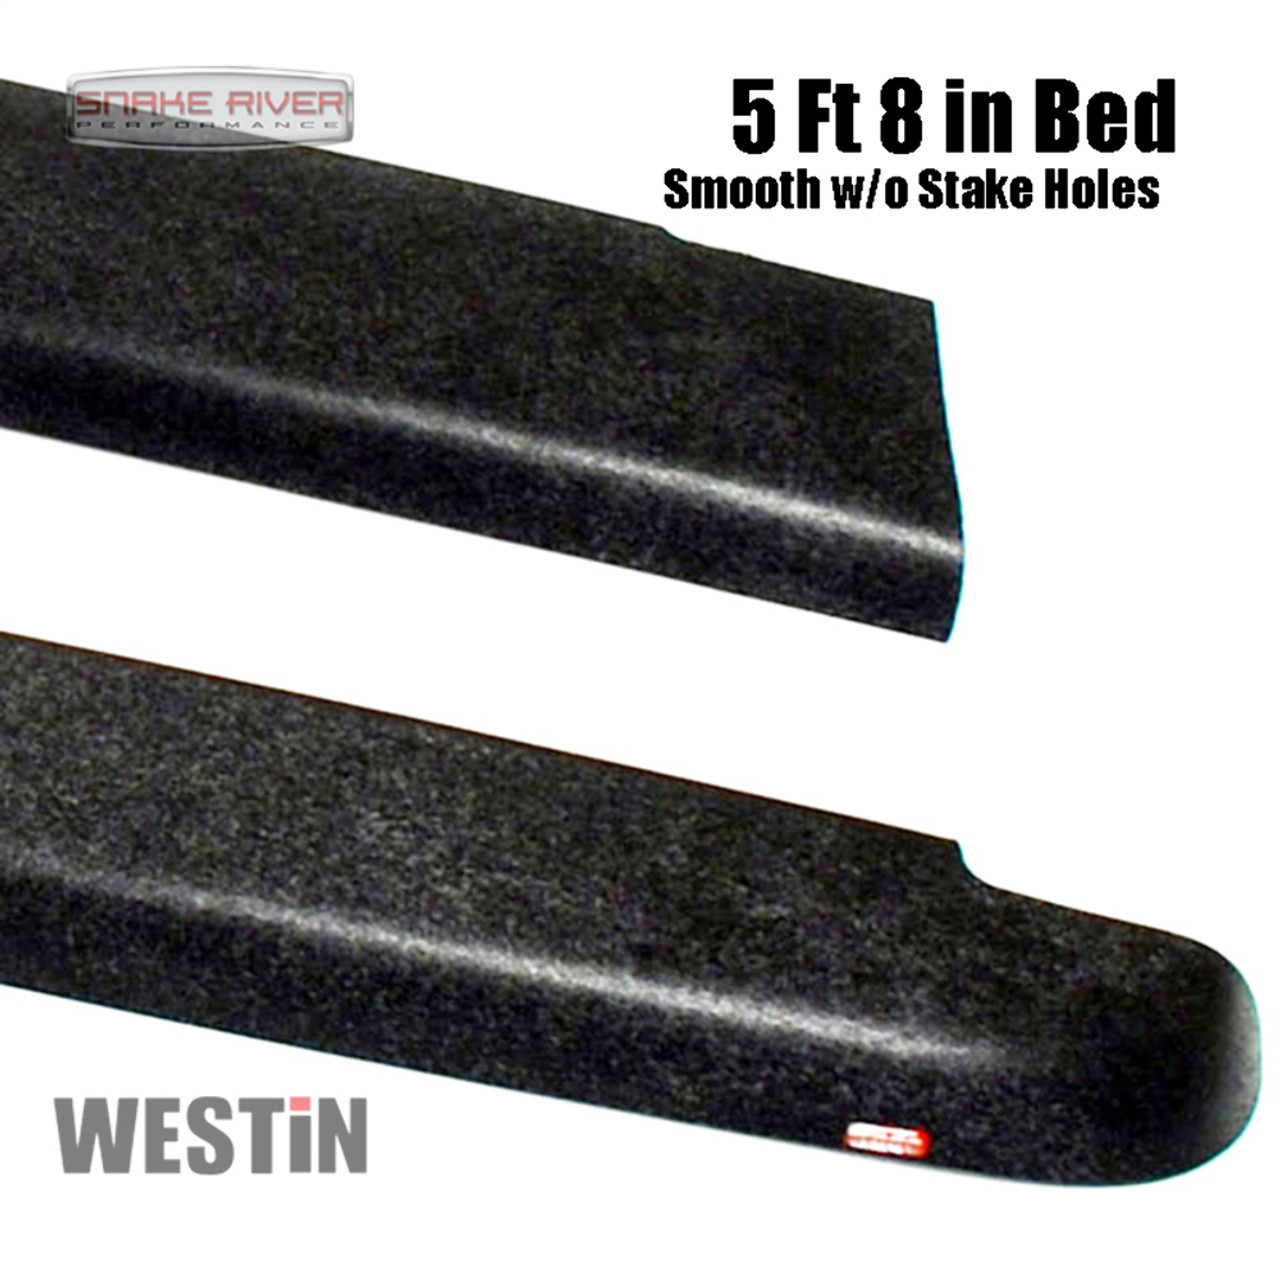 Westin Wade Truck Bed Side Rail Protector for 07-13 Chevy Silverado 1500 5.8 Bed